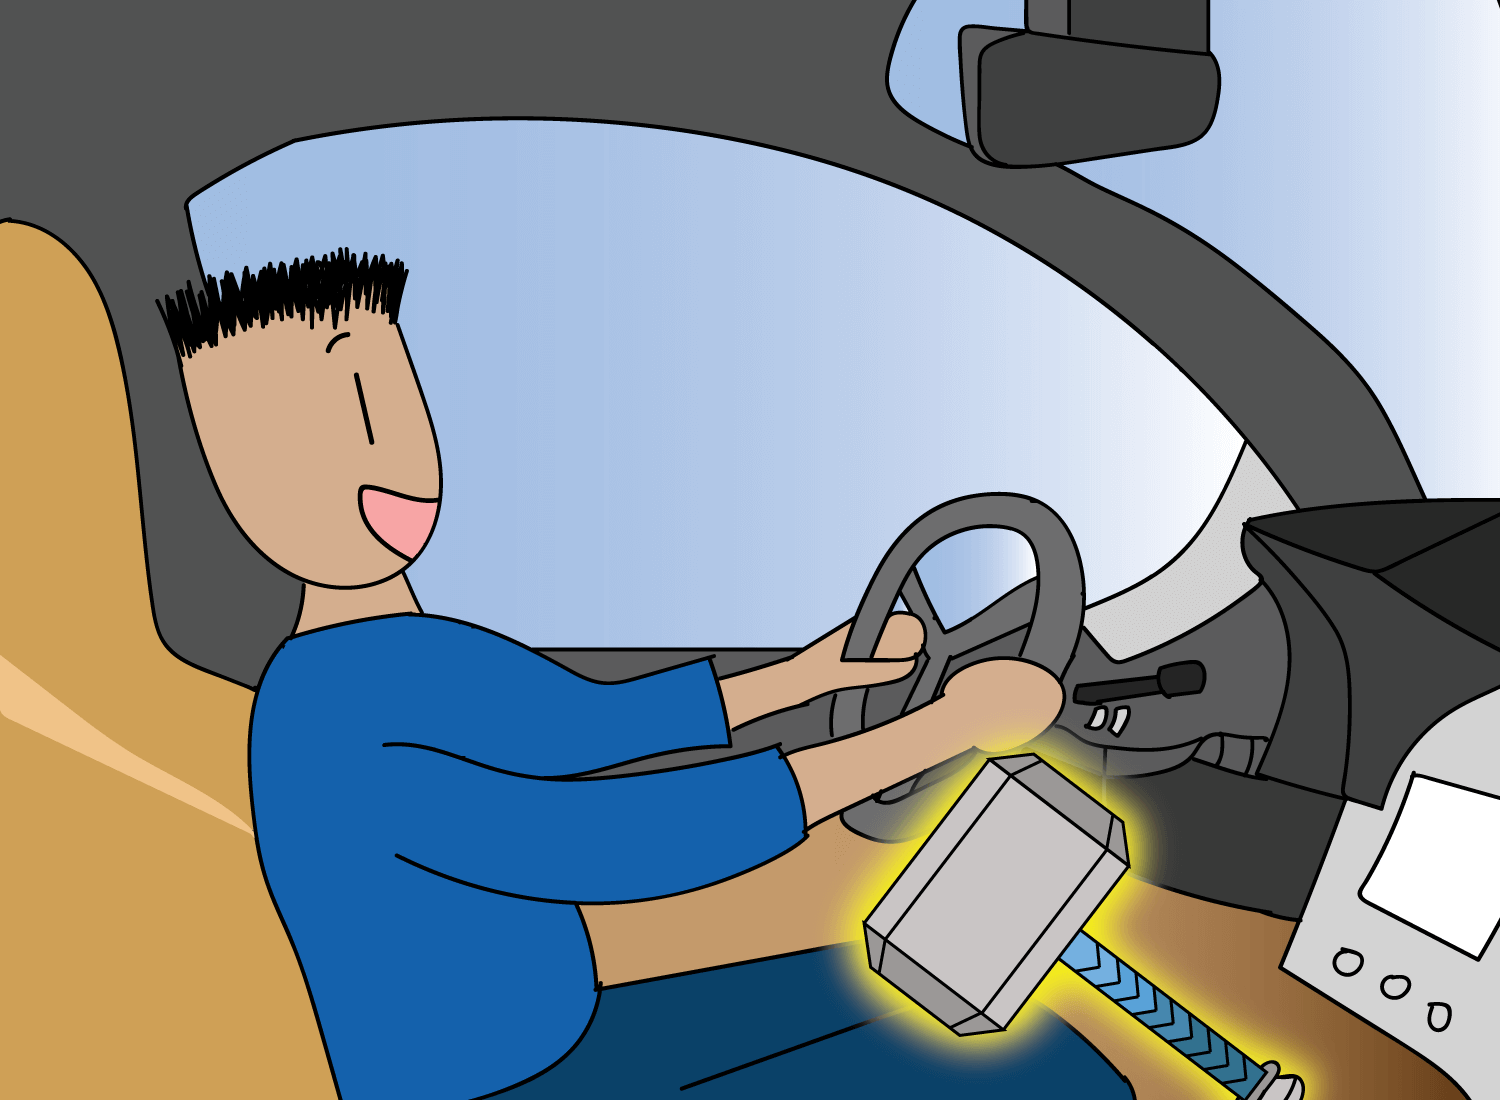 driving in the car illustration cartoon